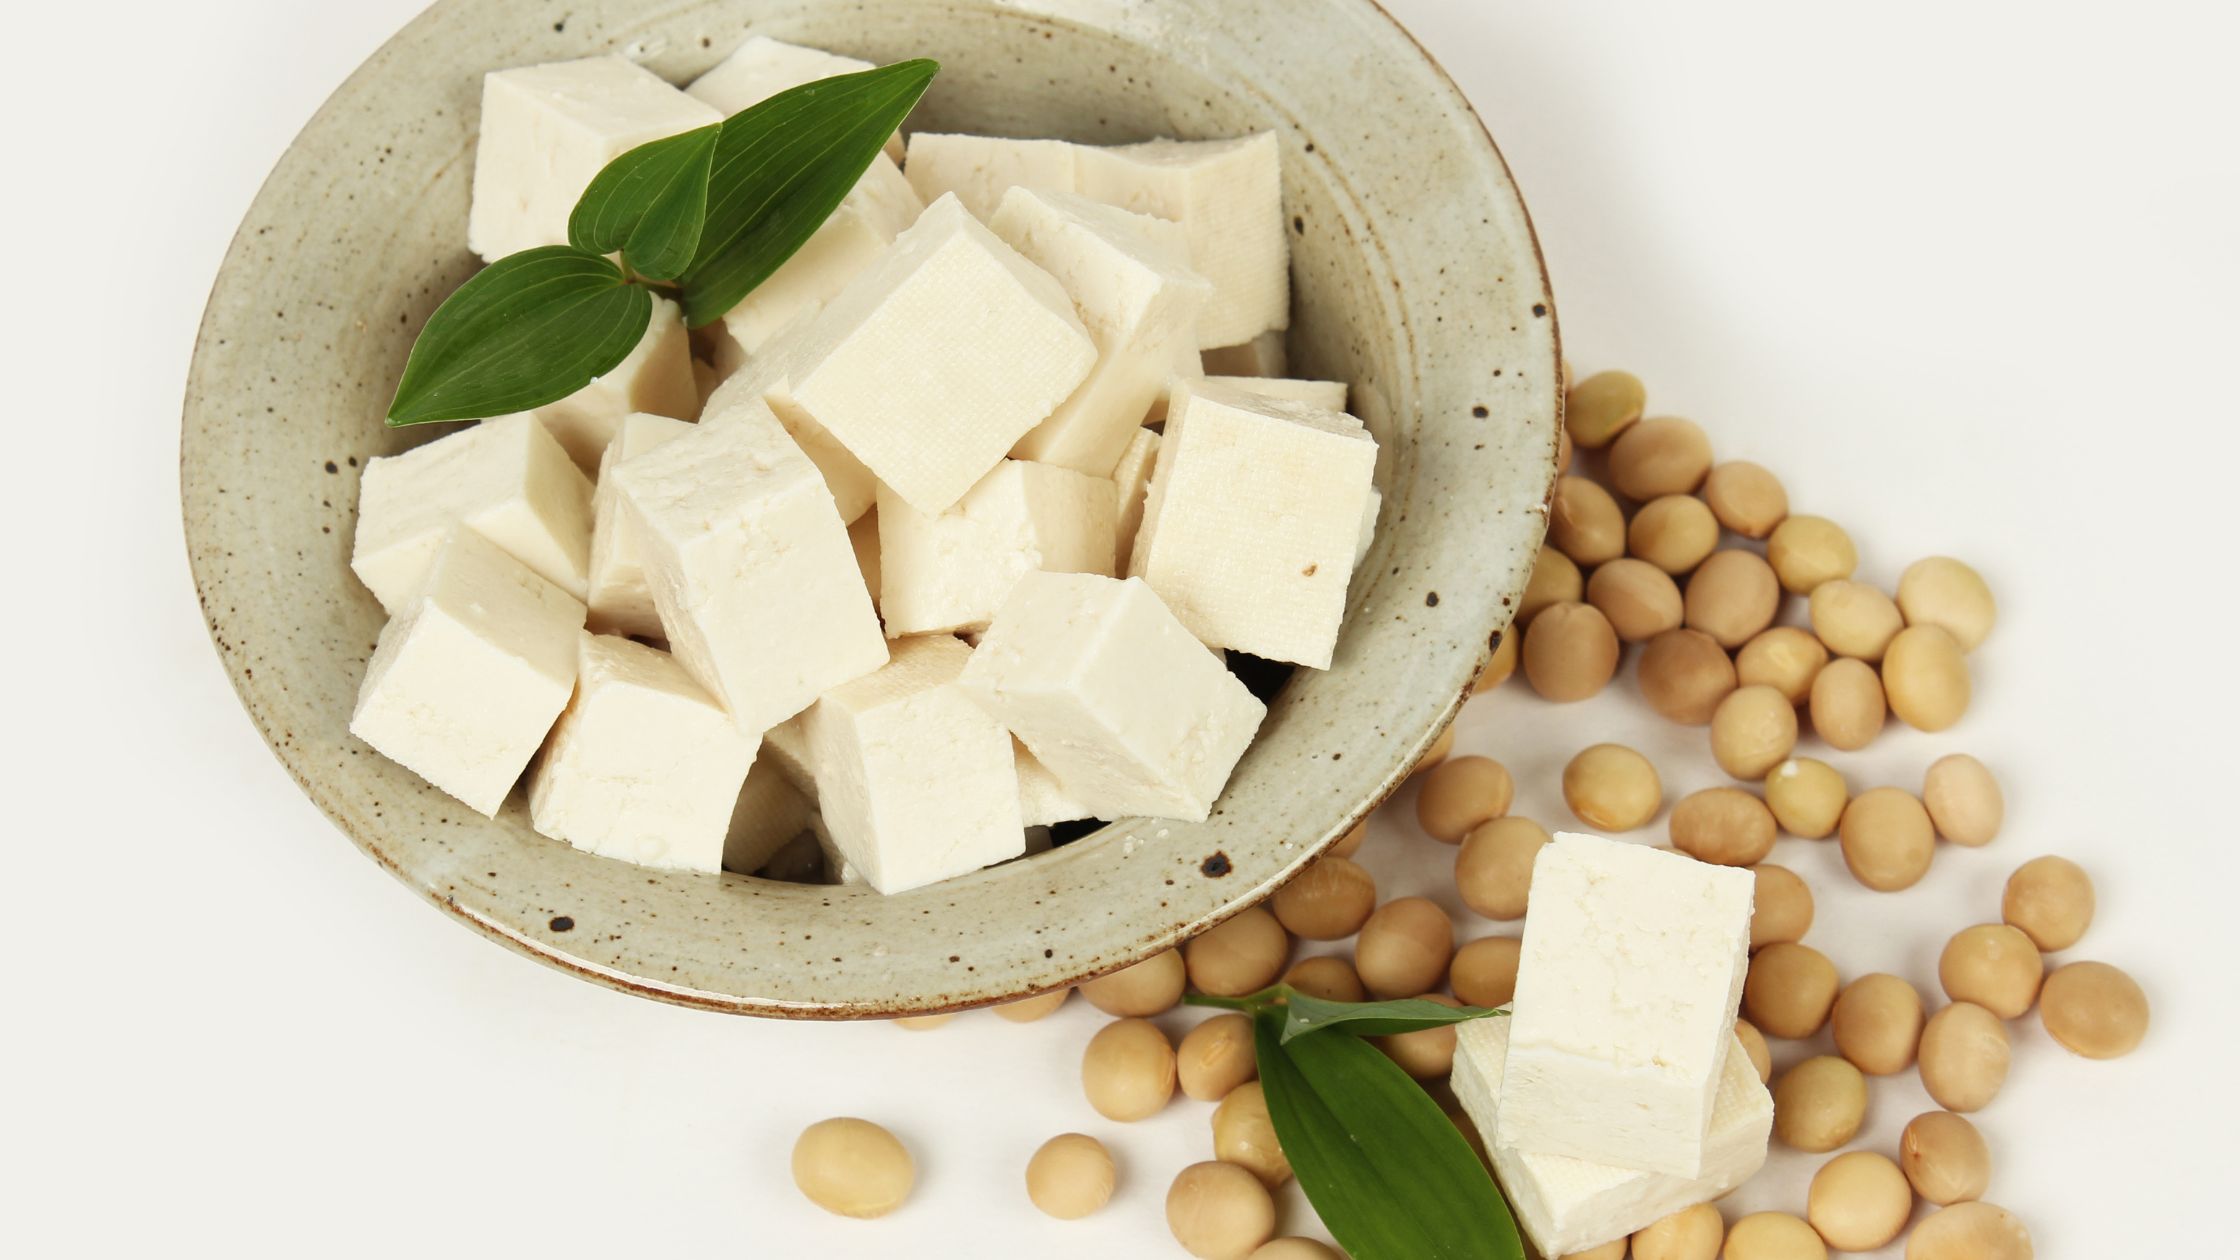 A full bowl of tofu placed on the table along with soy beans.